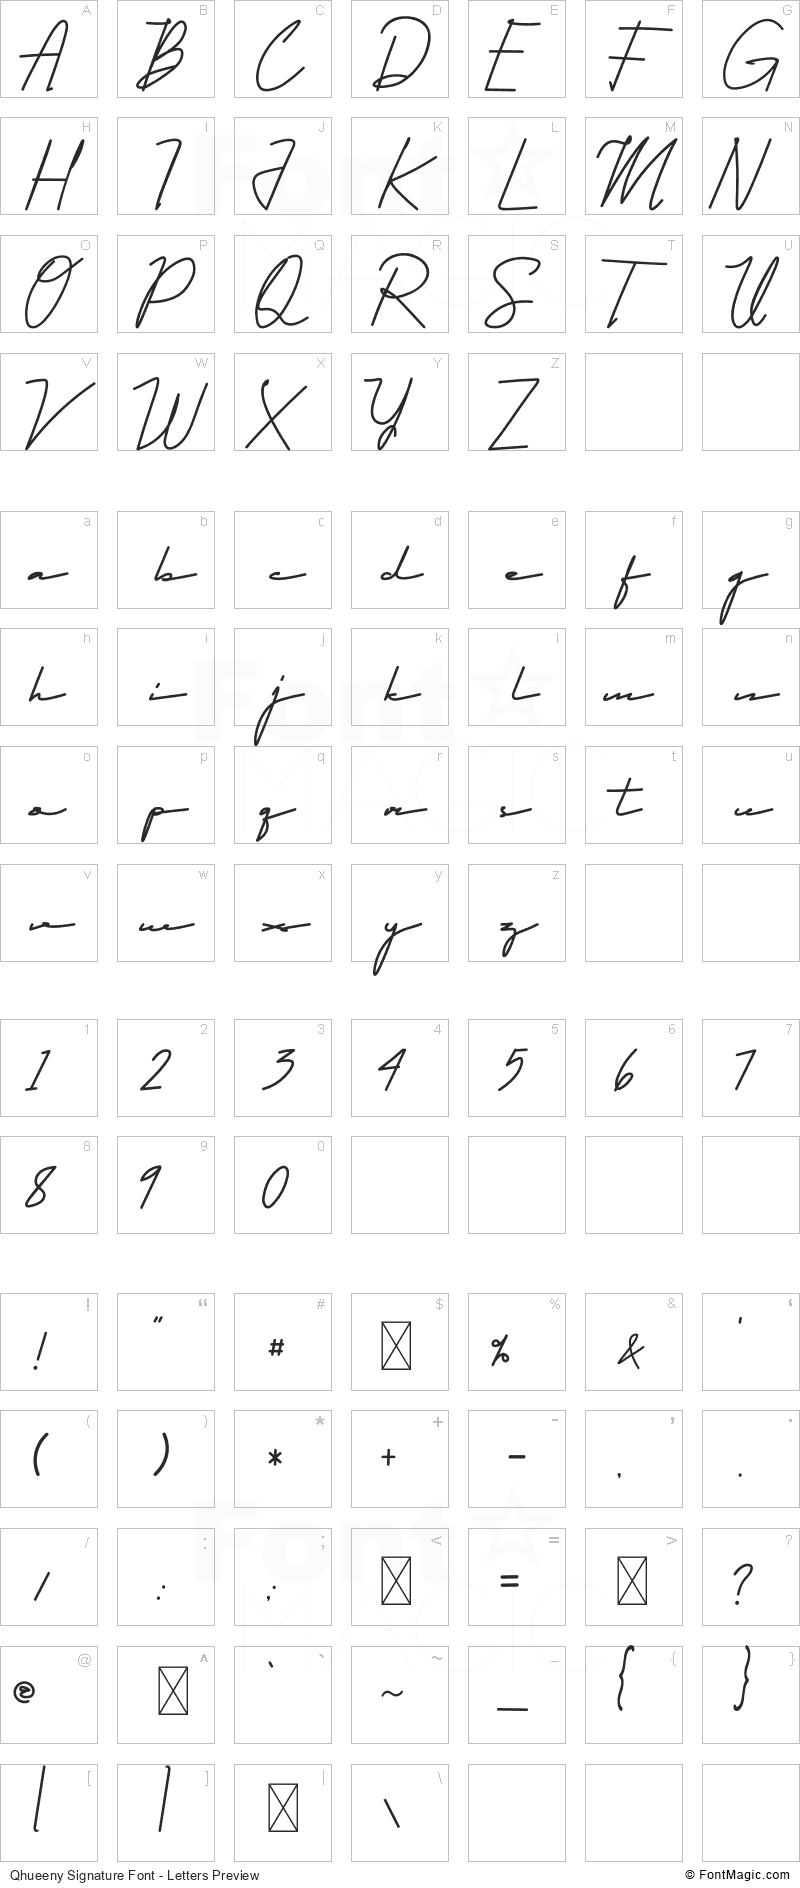 Qhueeny Signature Font - All Latters Preview Chart